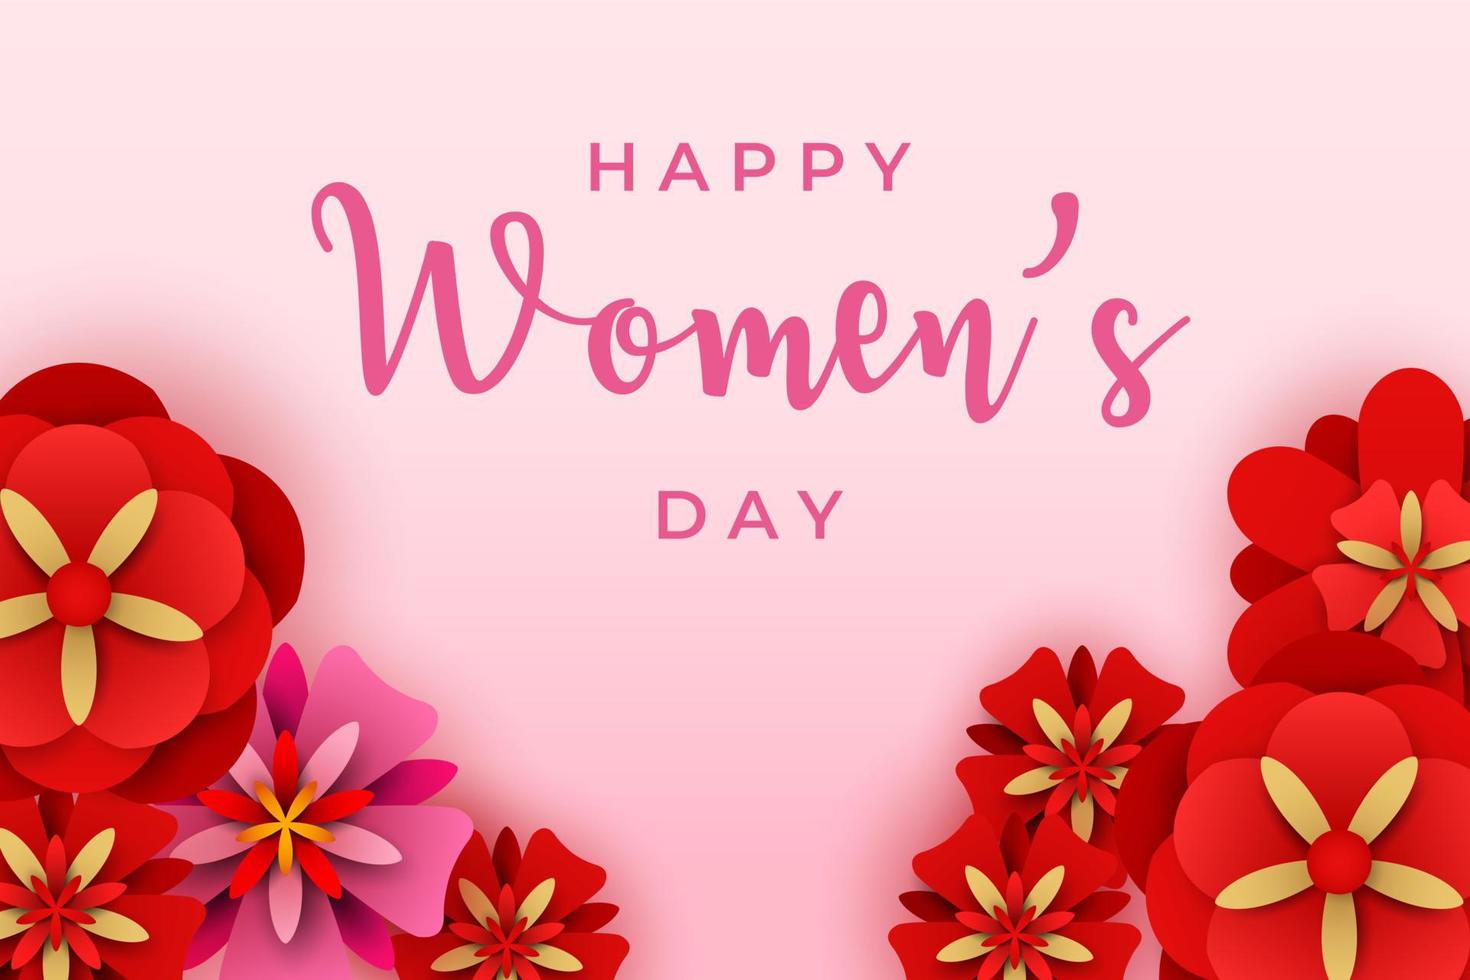 Happy international women's day with beautiful red and pink flowers vector